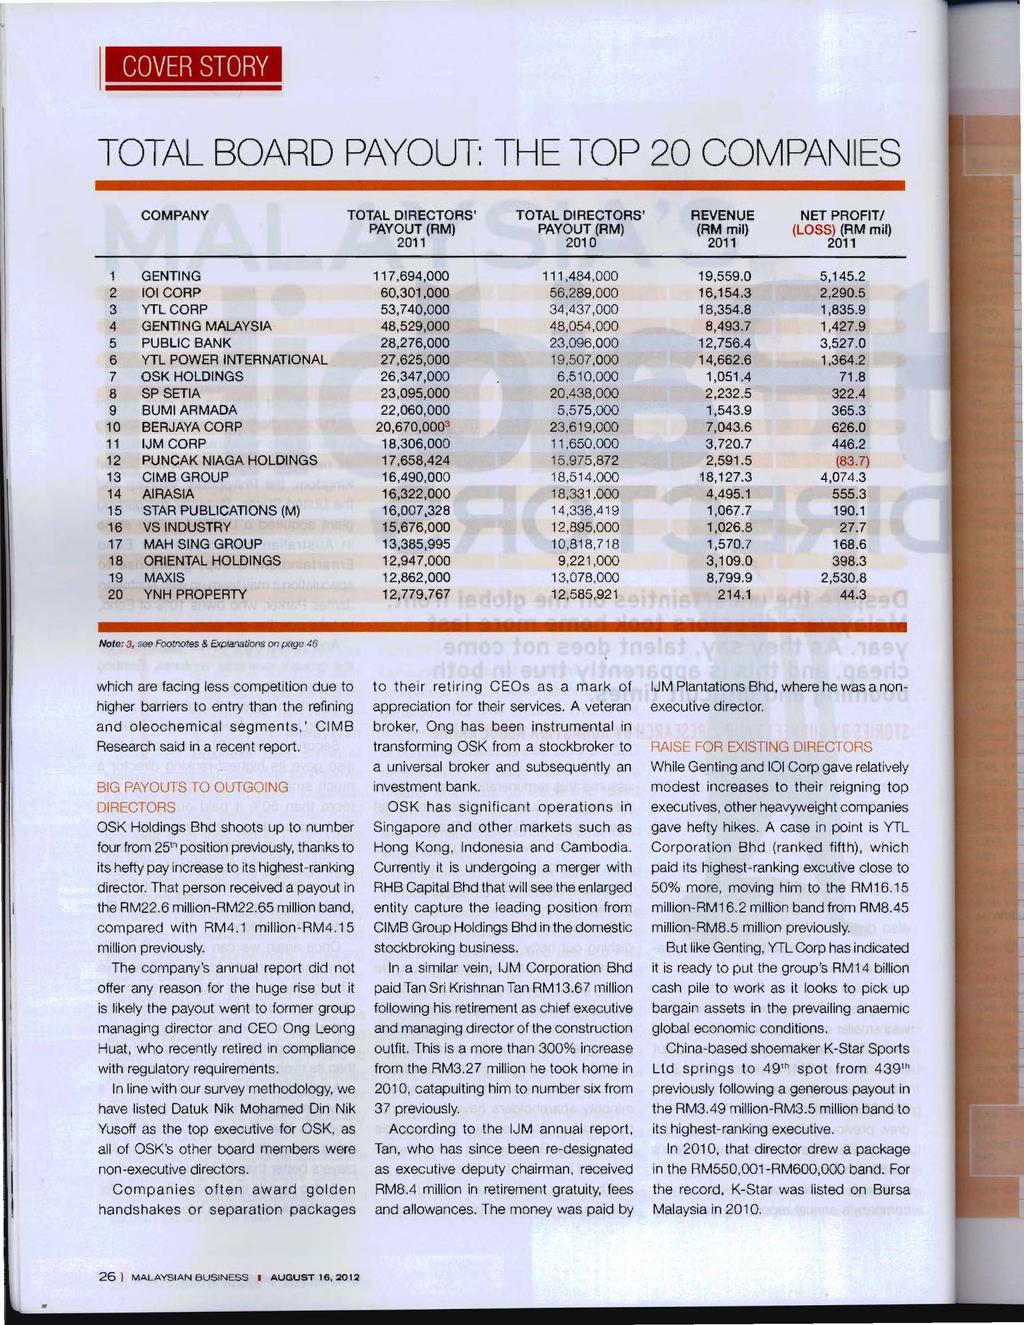 COVER STORY TOTAL BOARD PAYOUT: THE TOP 20 COMPANES COMPANY TOTAL DRECTORS' TOT,A;L DRECTORS' REVENUE NET PROFT PAYOUT (RM) PAYOUT (RM) (RM mil) (LOSS) (RM mil) 2011 2010 2011 2011 1 GENTNG 117.